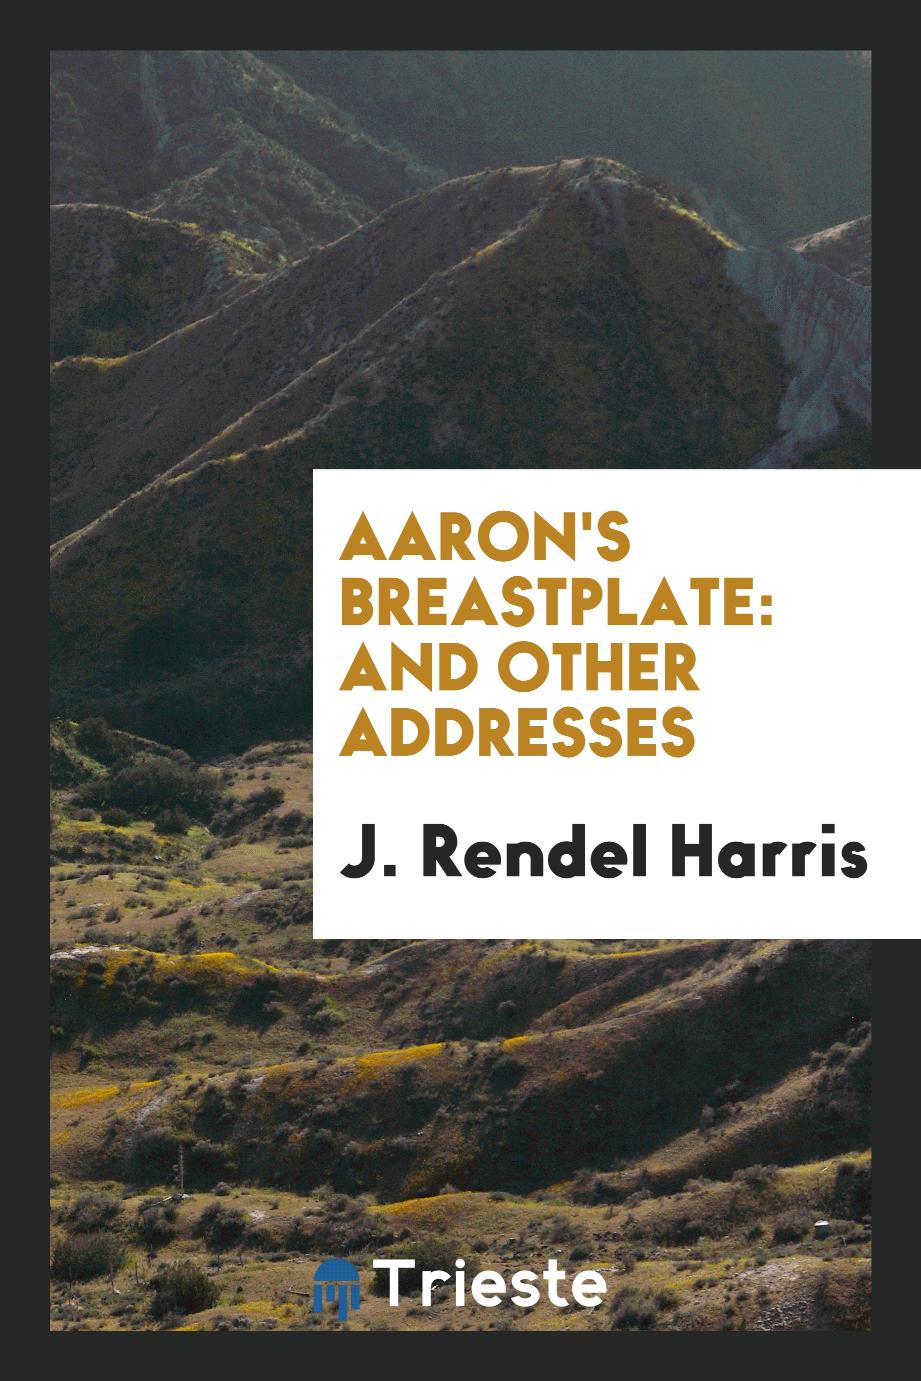 J. Rendel Harris - Aaron's Breastplate: And Other Addresses